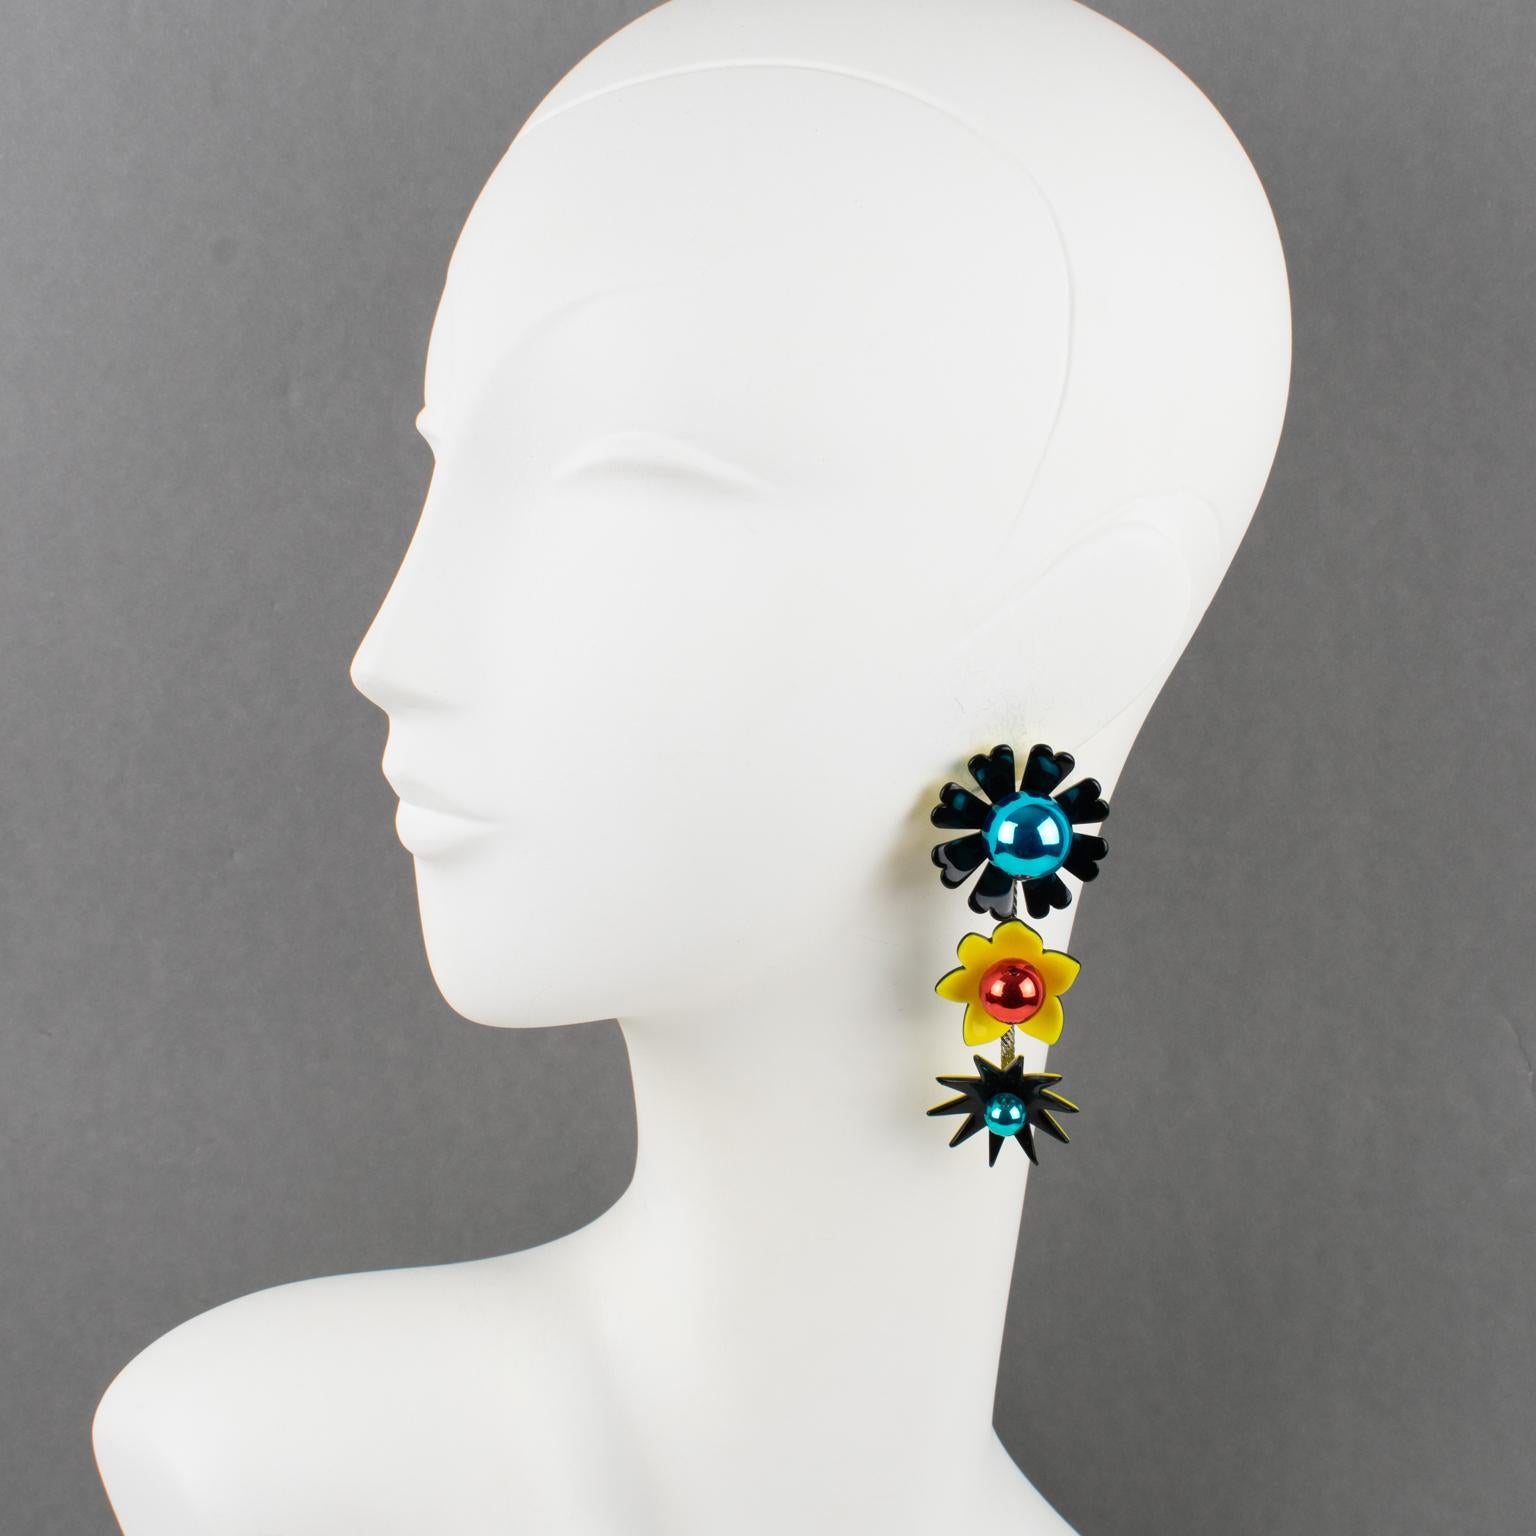 These stunning Kenzo Paris resin and glass pierced earrings feature a long dangling drop shape with a floral design built with black and yellow acrylic. The flowers are embellished with a mirrored glass bead in turquoise blue and bright red assorted